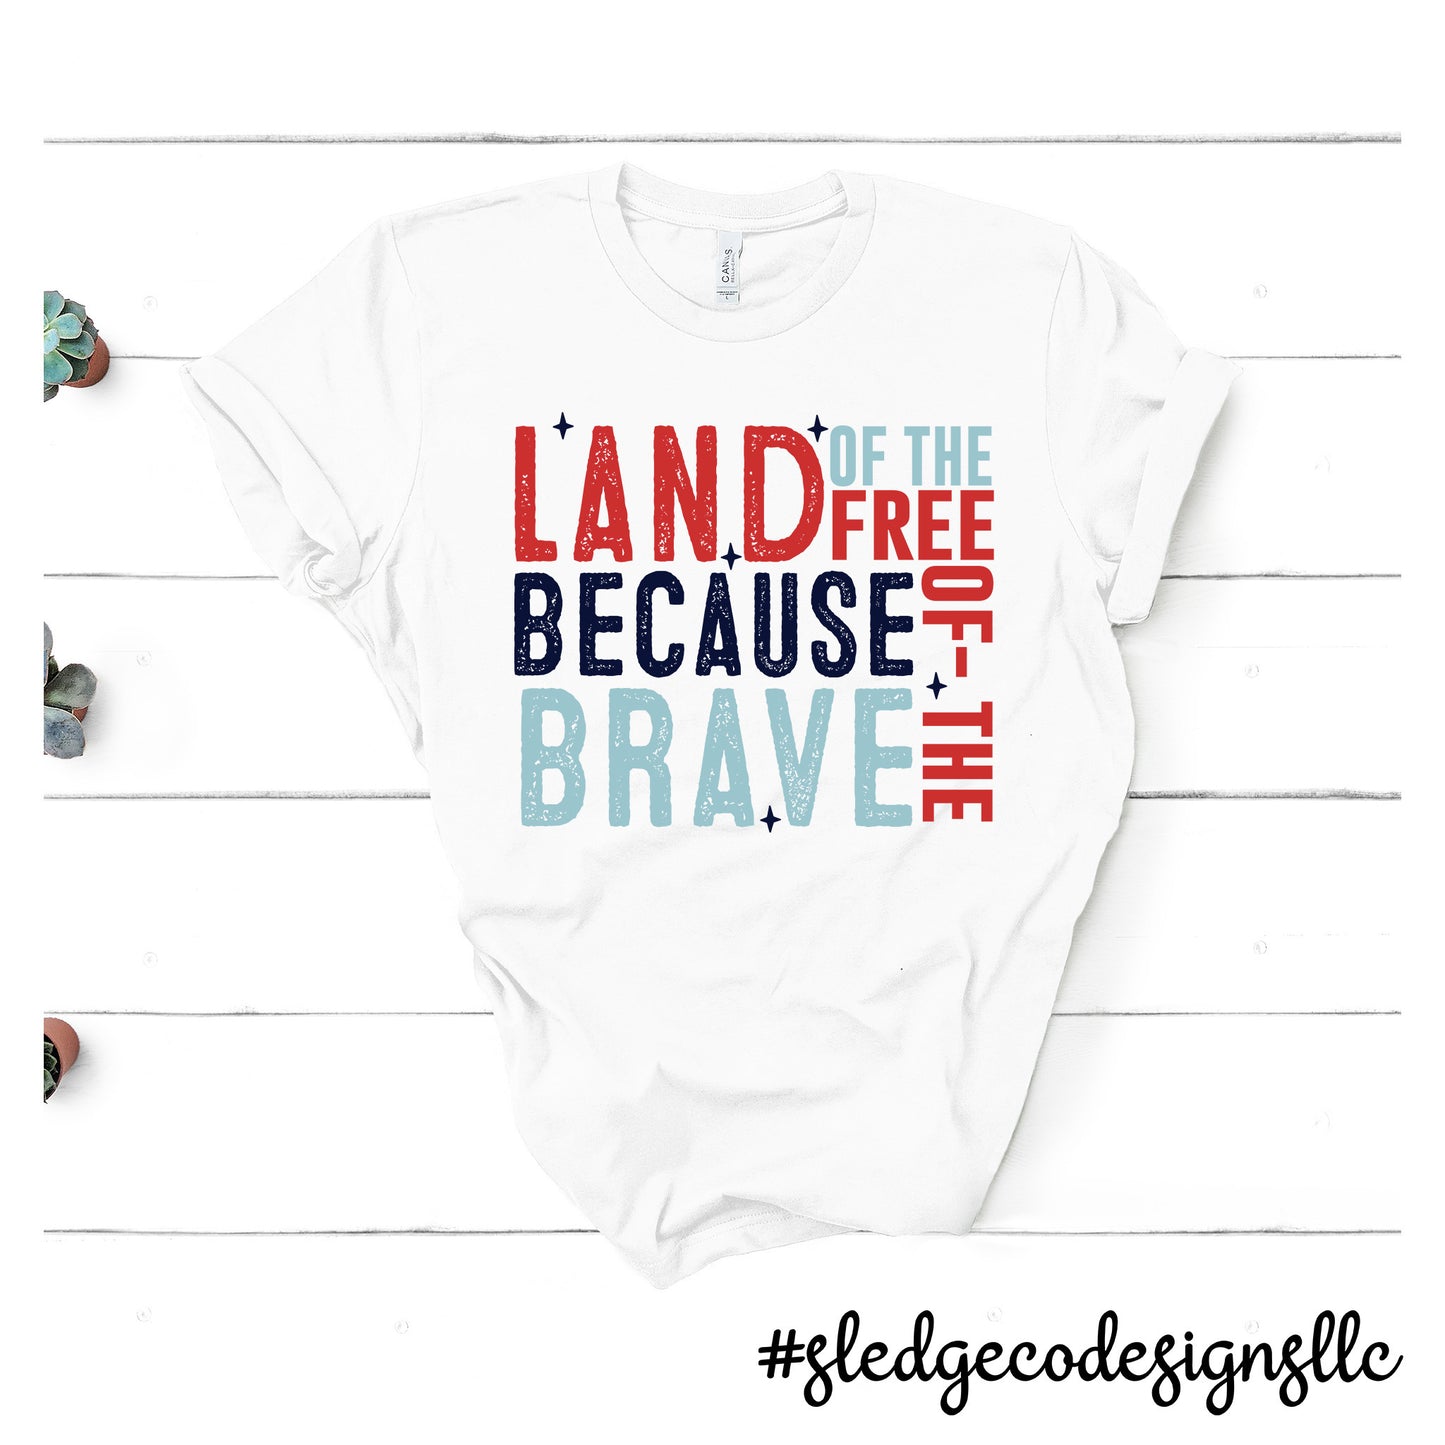 LAND OF THE FREE BECAUSE OF THE BRAVE | Patriot | July 4th | Custom Unisex TSHIRT